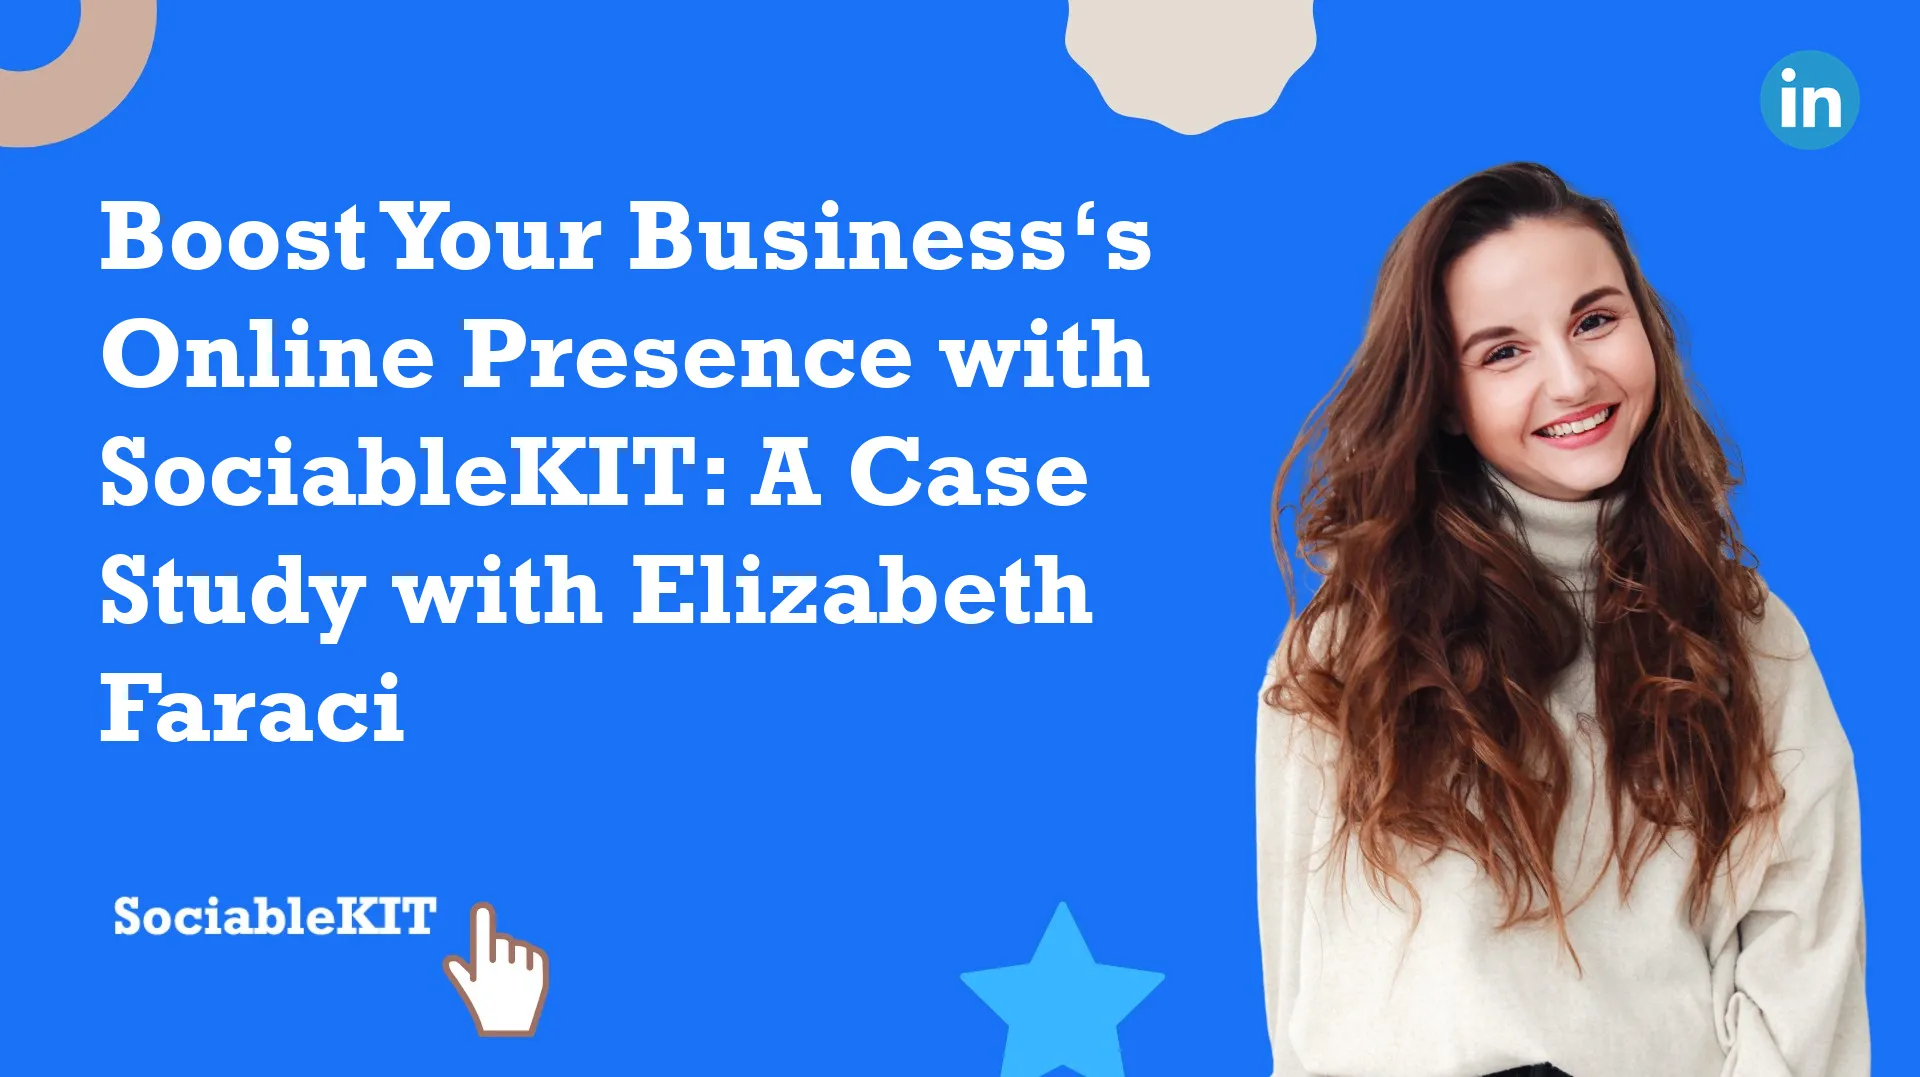 Boost Your Business’s Online Presence with SociableKIT: A Case Study with Elizabeth Faraci